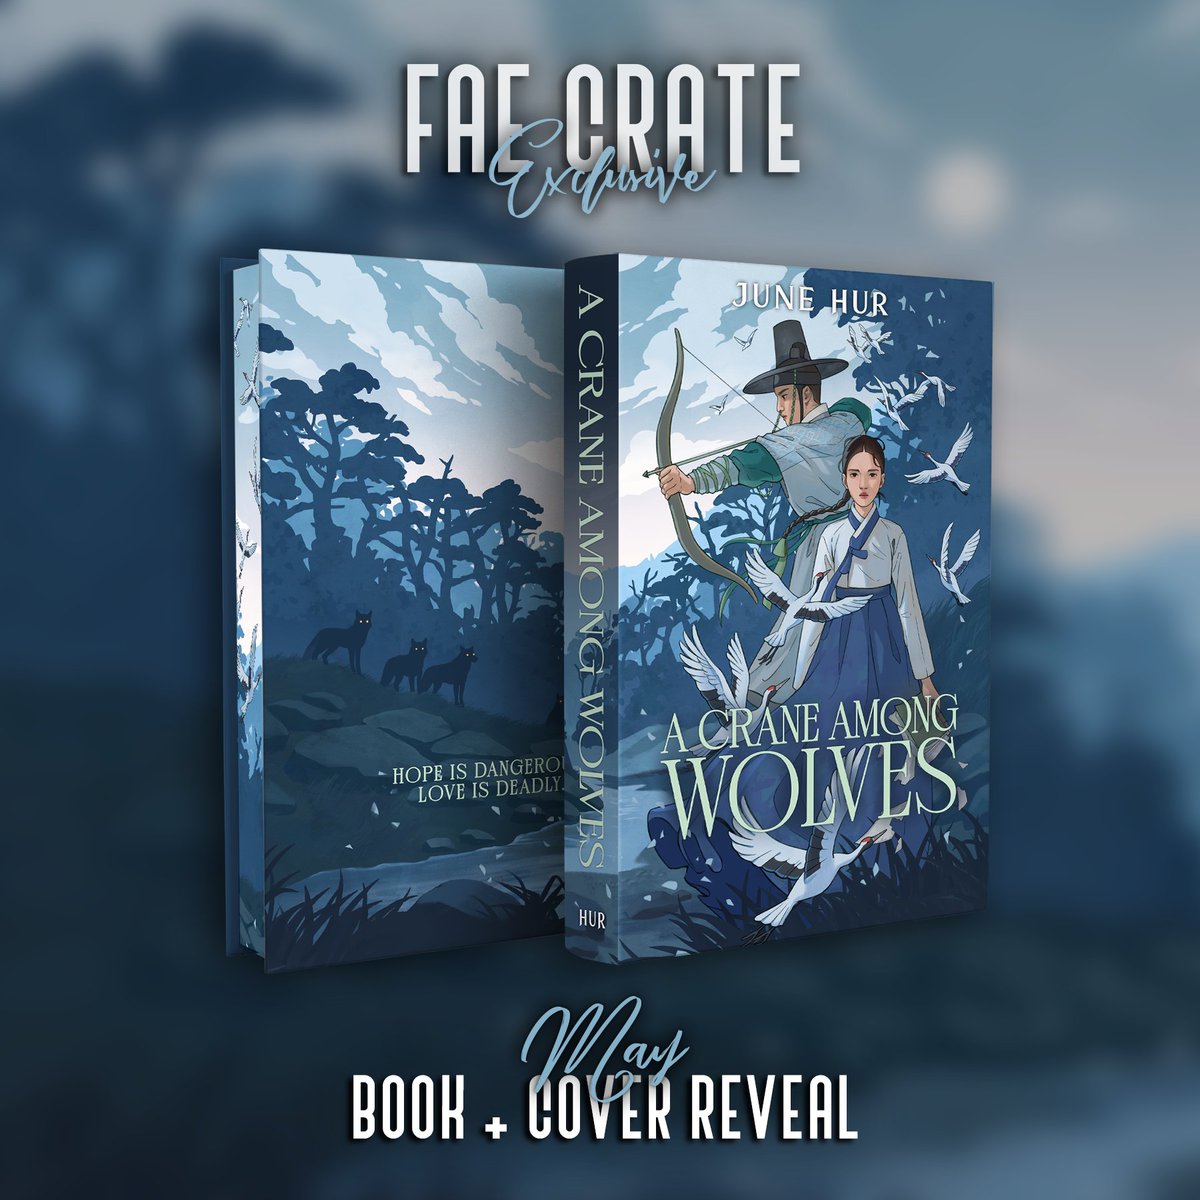 ✨MAY BOOK & EXCLUSIVE COVER REVEAL✨ We are so thrilled to reveal that our May book is A CRANE AMONG WOLVES by @WriterJuneHur! Here's our exclusive all-new cover by @HayleeMorice and a peek at the page edge design! 🏹✨ JOIN THE WAITLIST: faecrate.com/pages/monthly